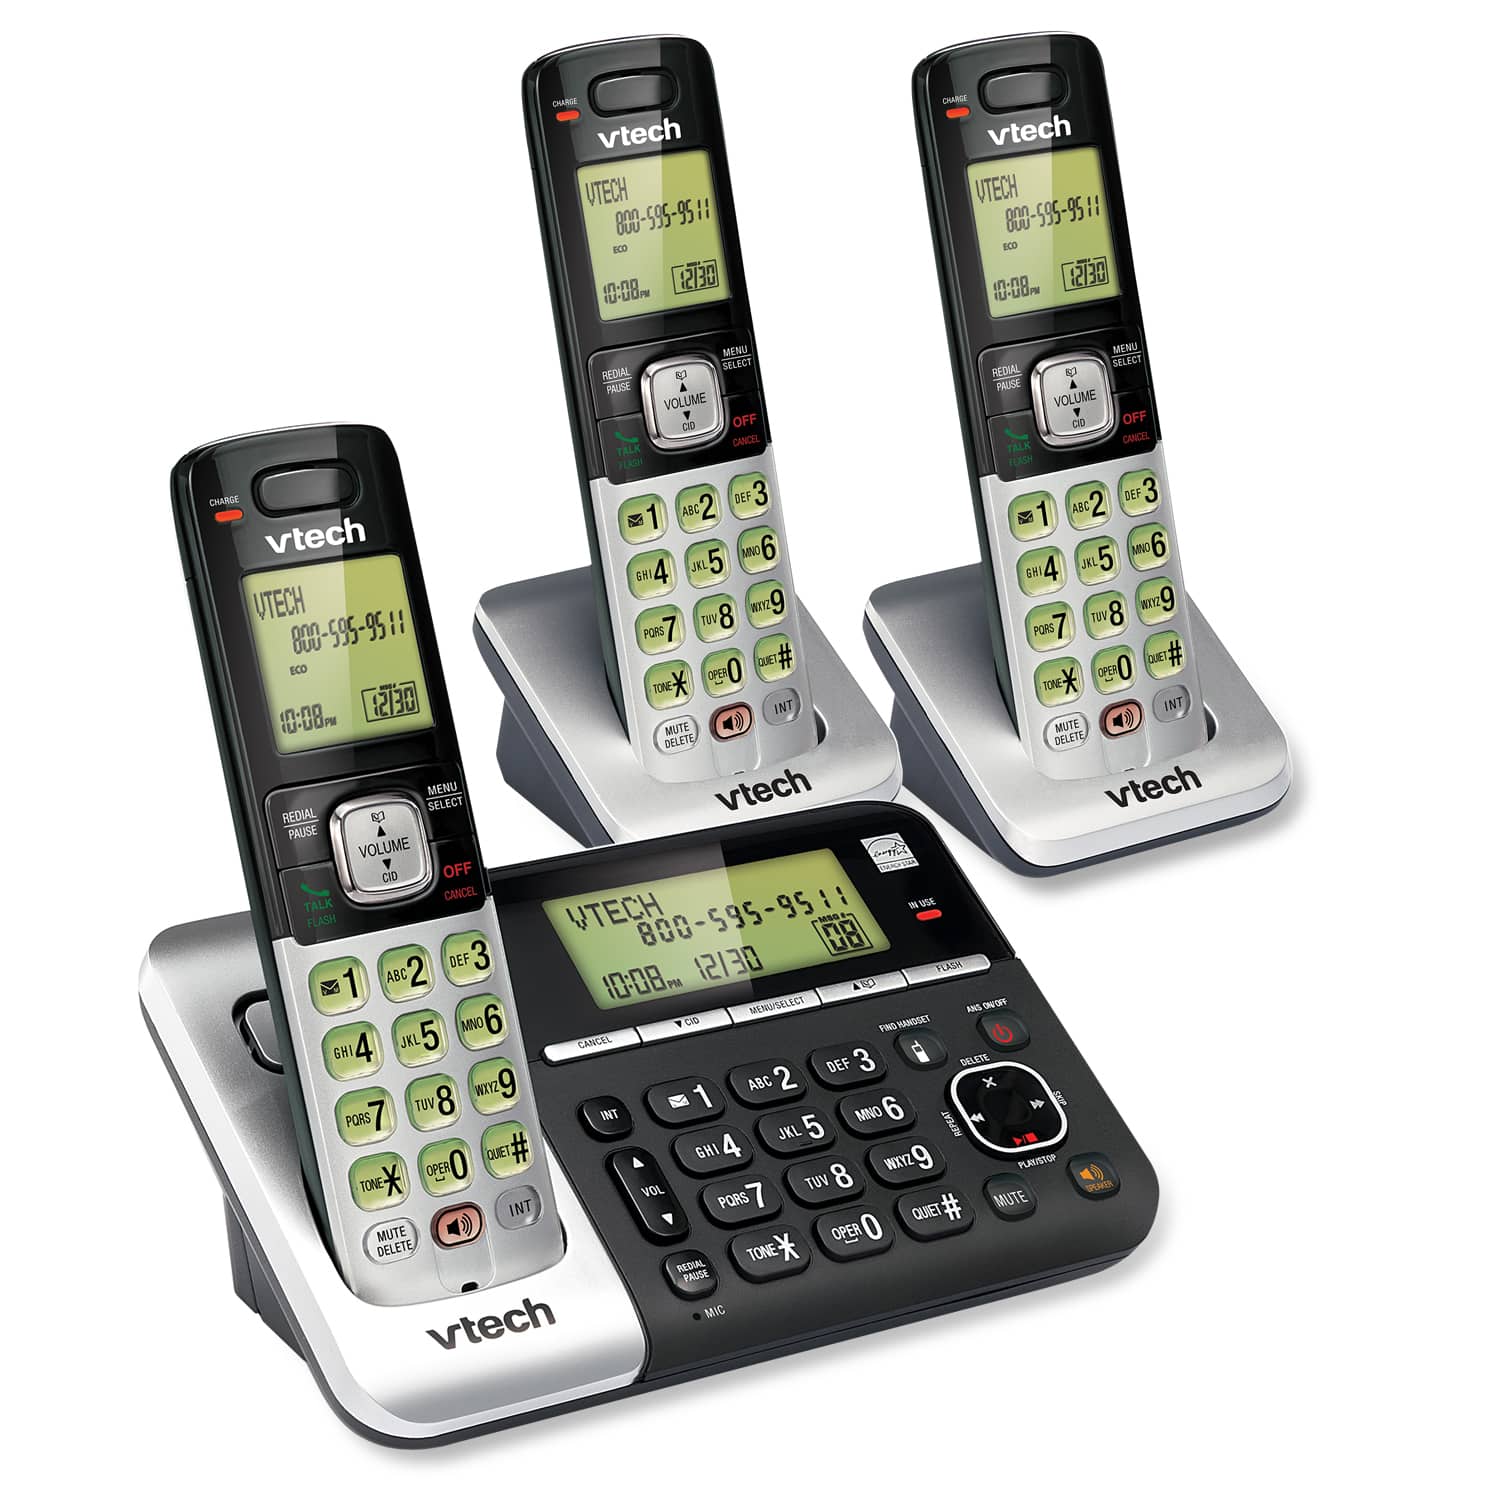 3 Handset Answering System with Dual Caller ID/Call Waiting - view 3